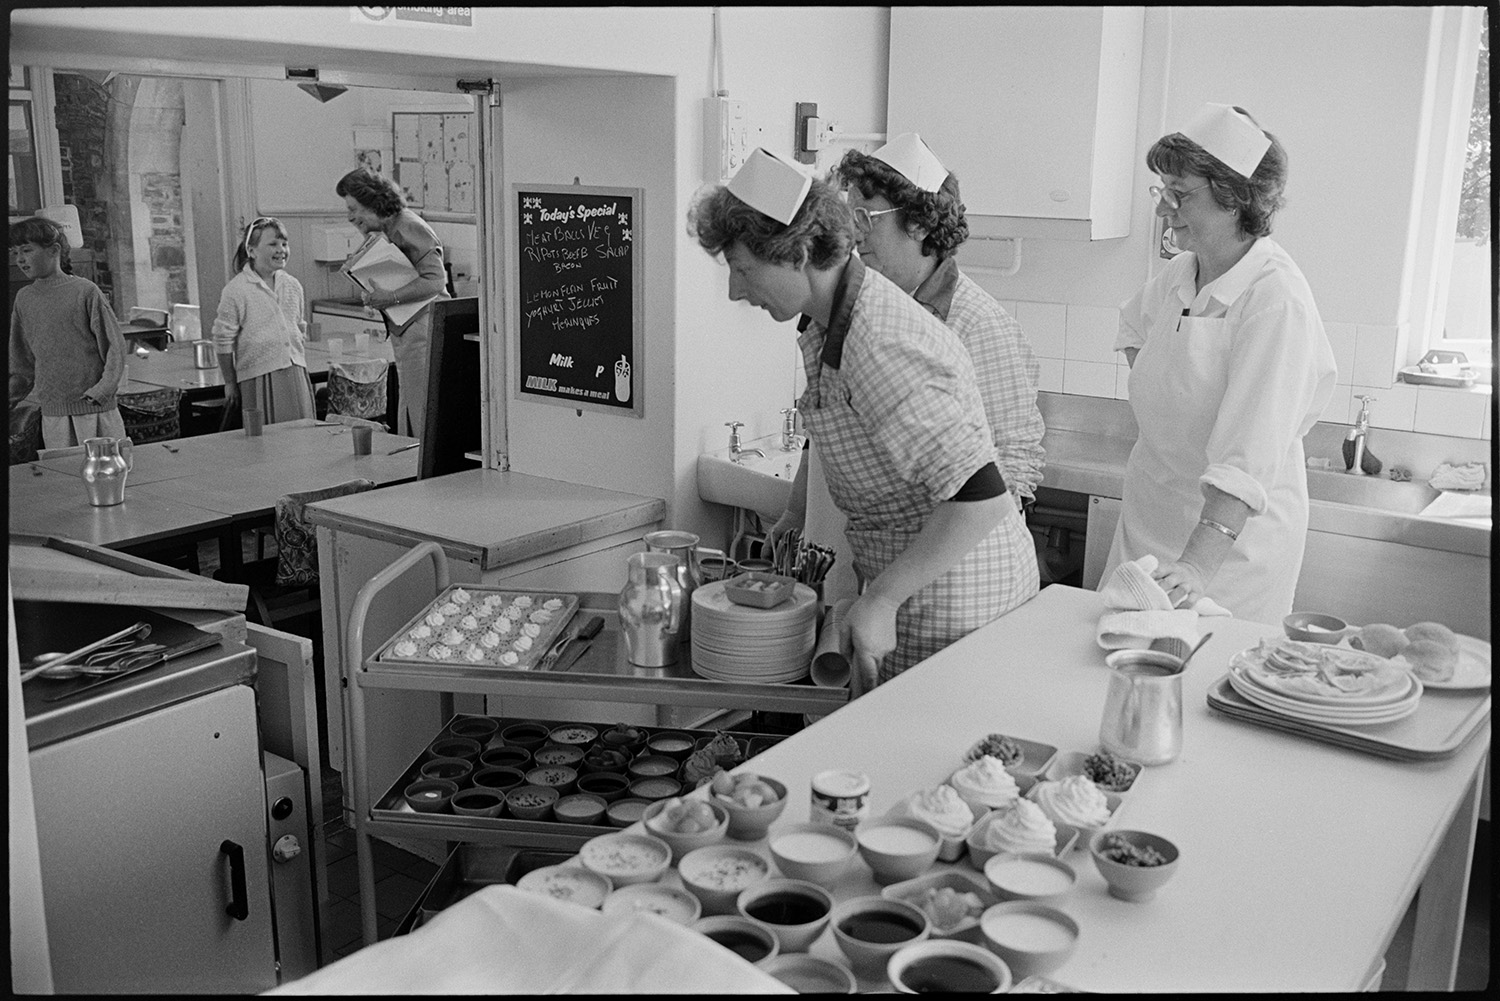 Primary school day. Teachers and pupils. Catering women making and serving lunch. Line up in yard.
[Three dinner ladies at Chulmleigh Primary School preparing to serve food in the canteen. One woman is pushing a trolley with various bowls and plates of food. Students and a teach can be seen in the dining room through the serving hatch.]